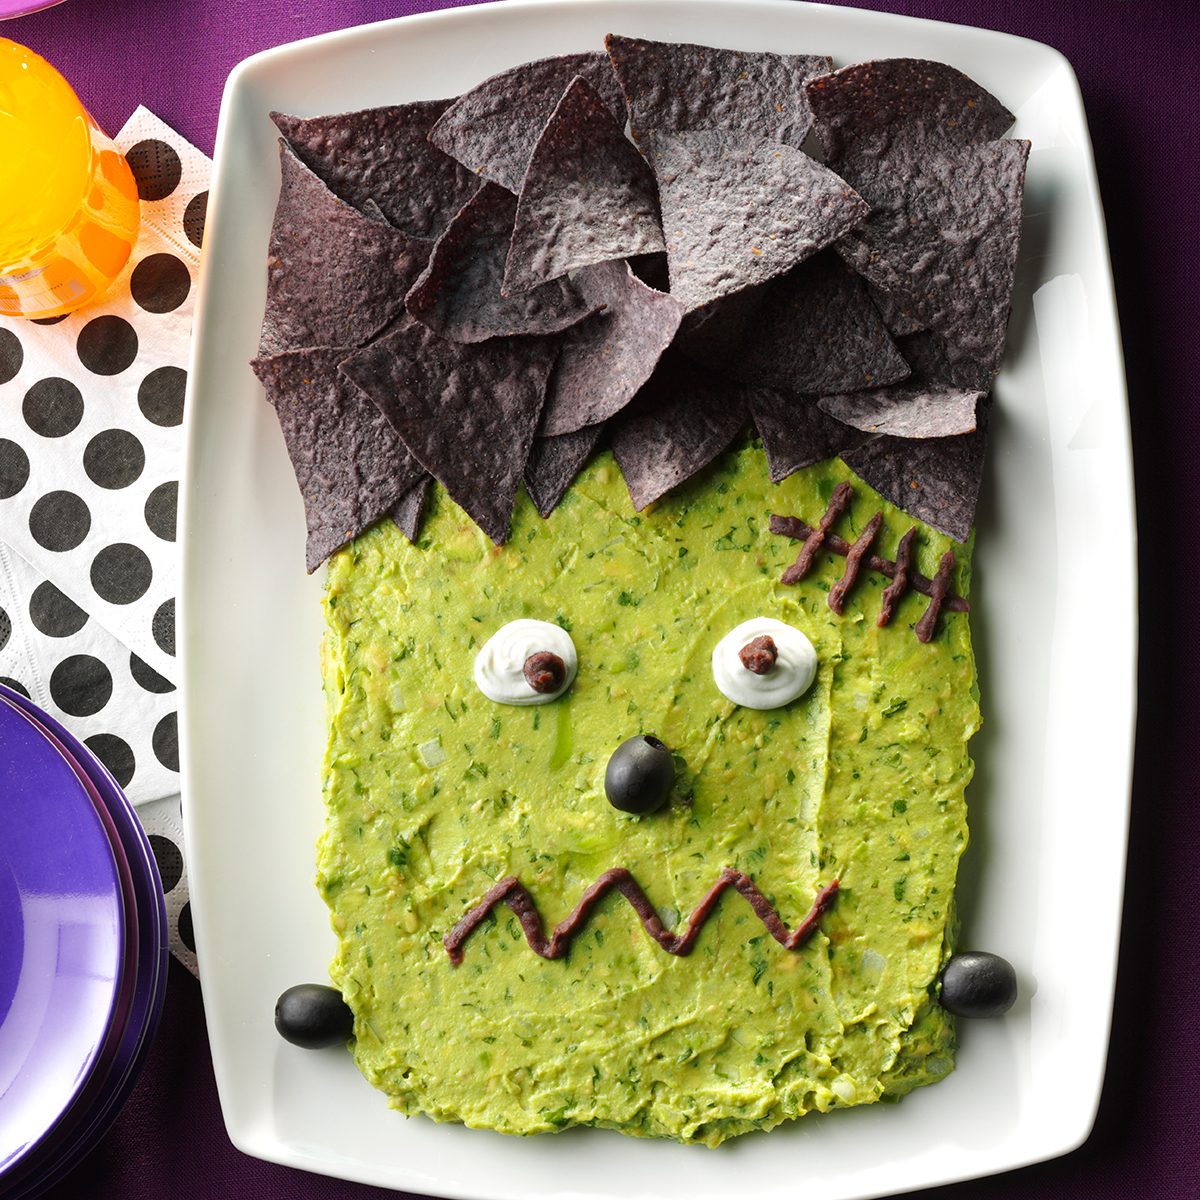 15 Easy DIY Halloween Ideas for Snacks and Decorations | Taste of Home